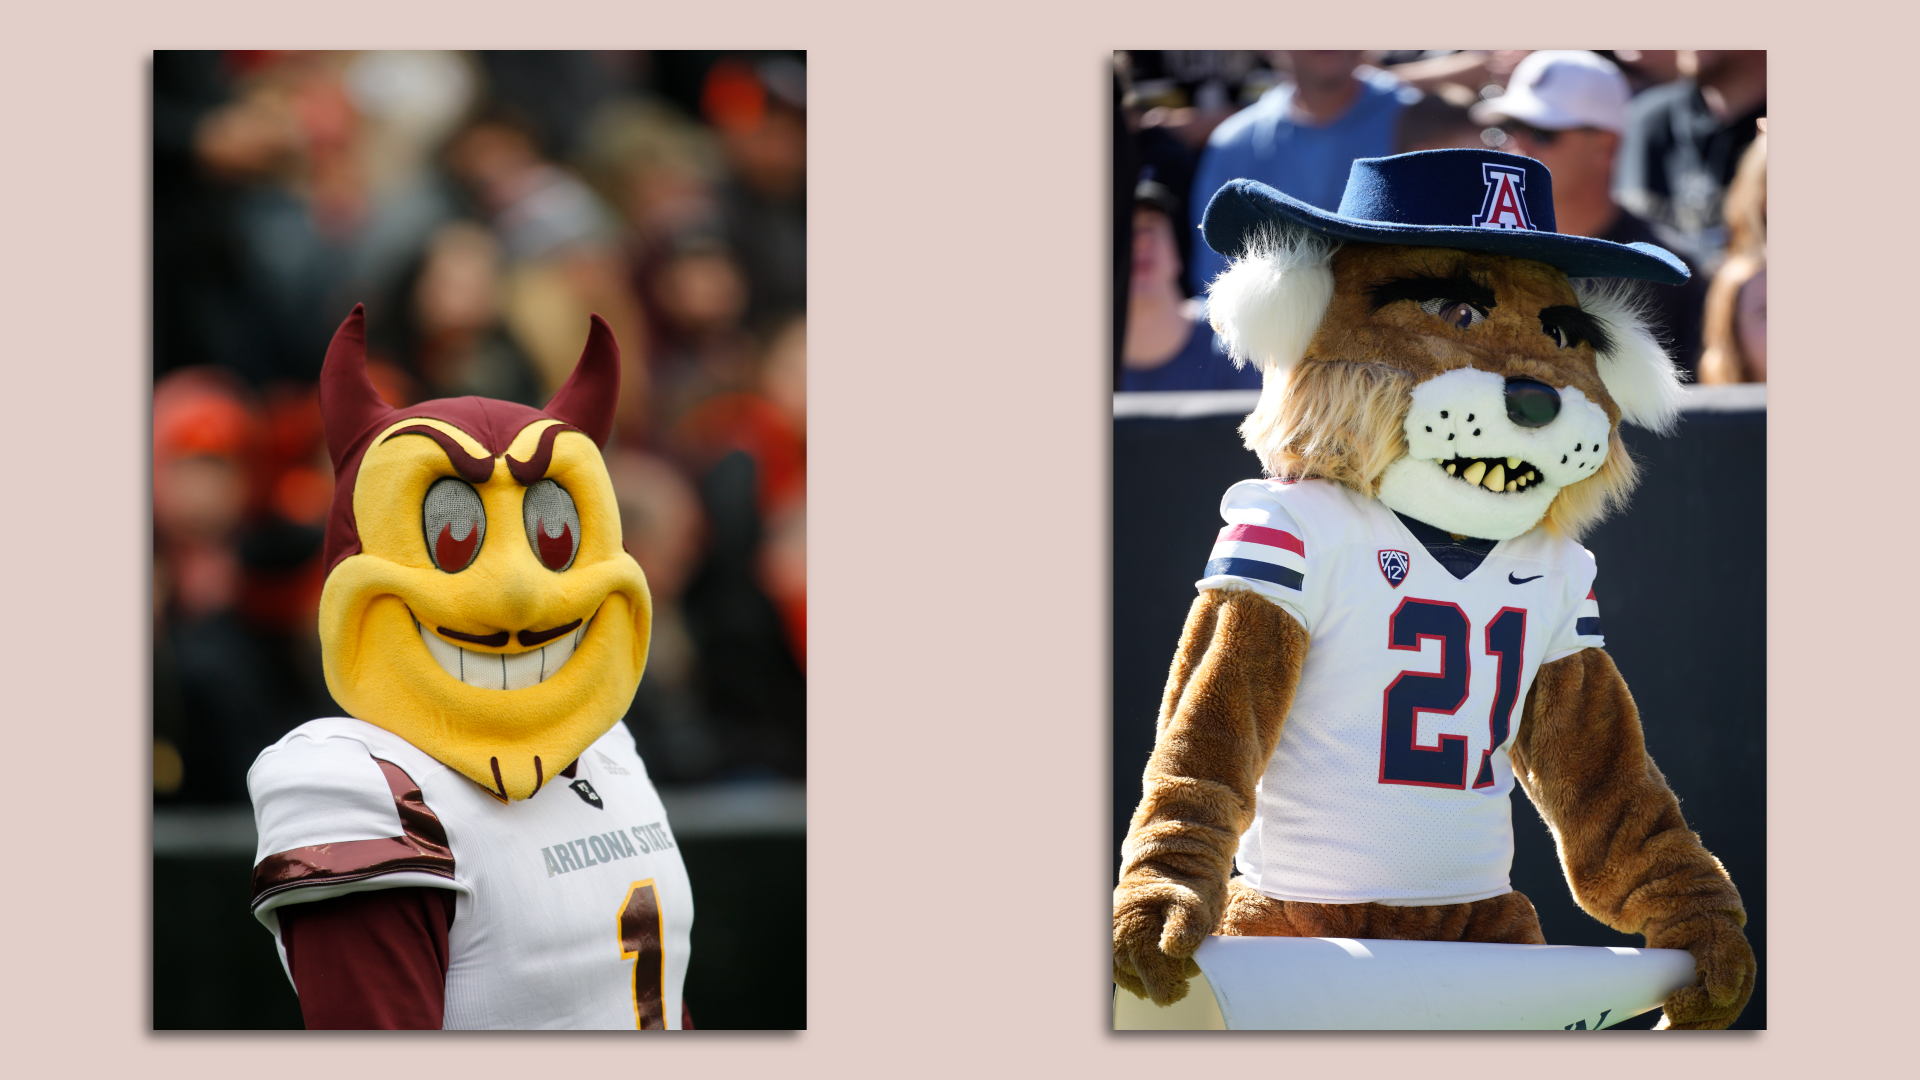 Side-by-side photos of two costumed mascots, one a Sun Devil, the other a wildcat. 